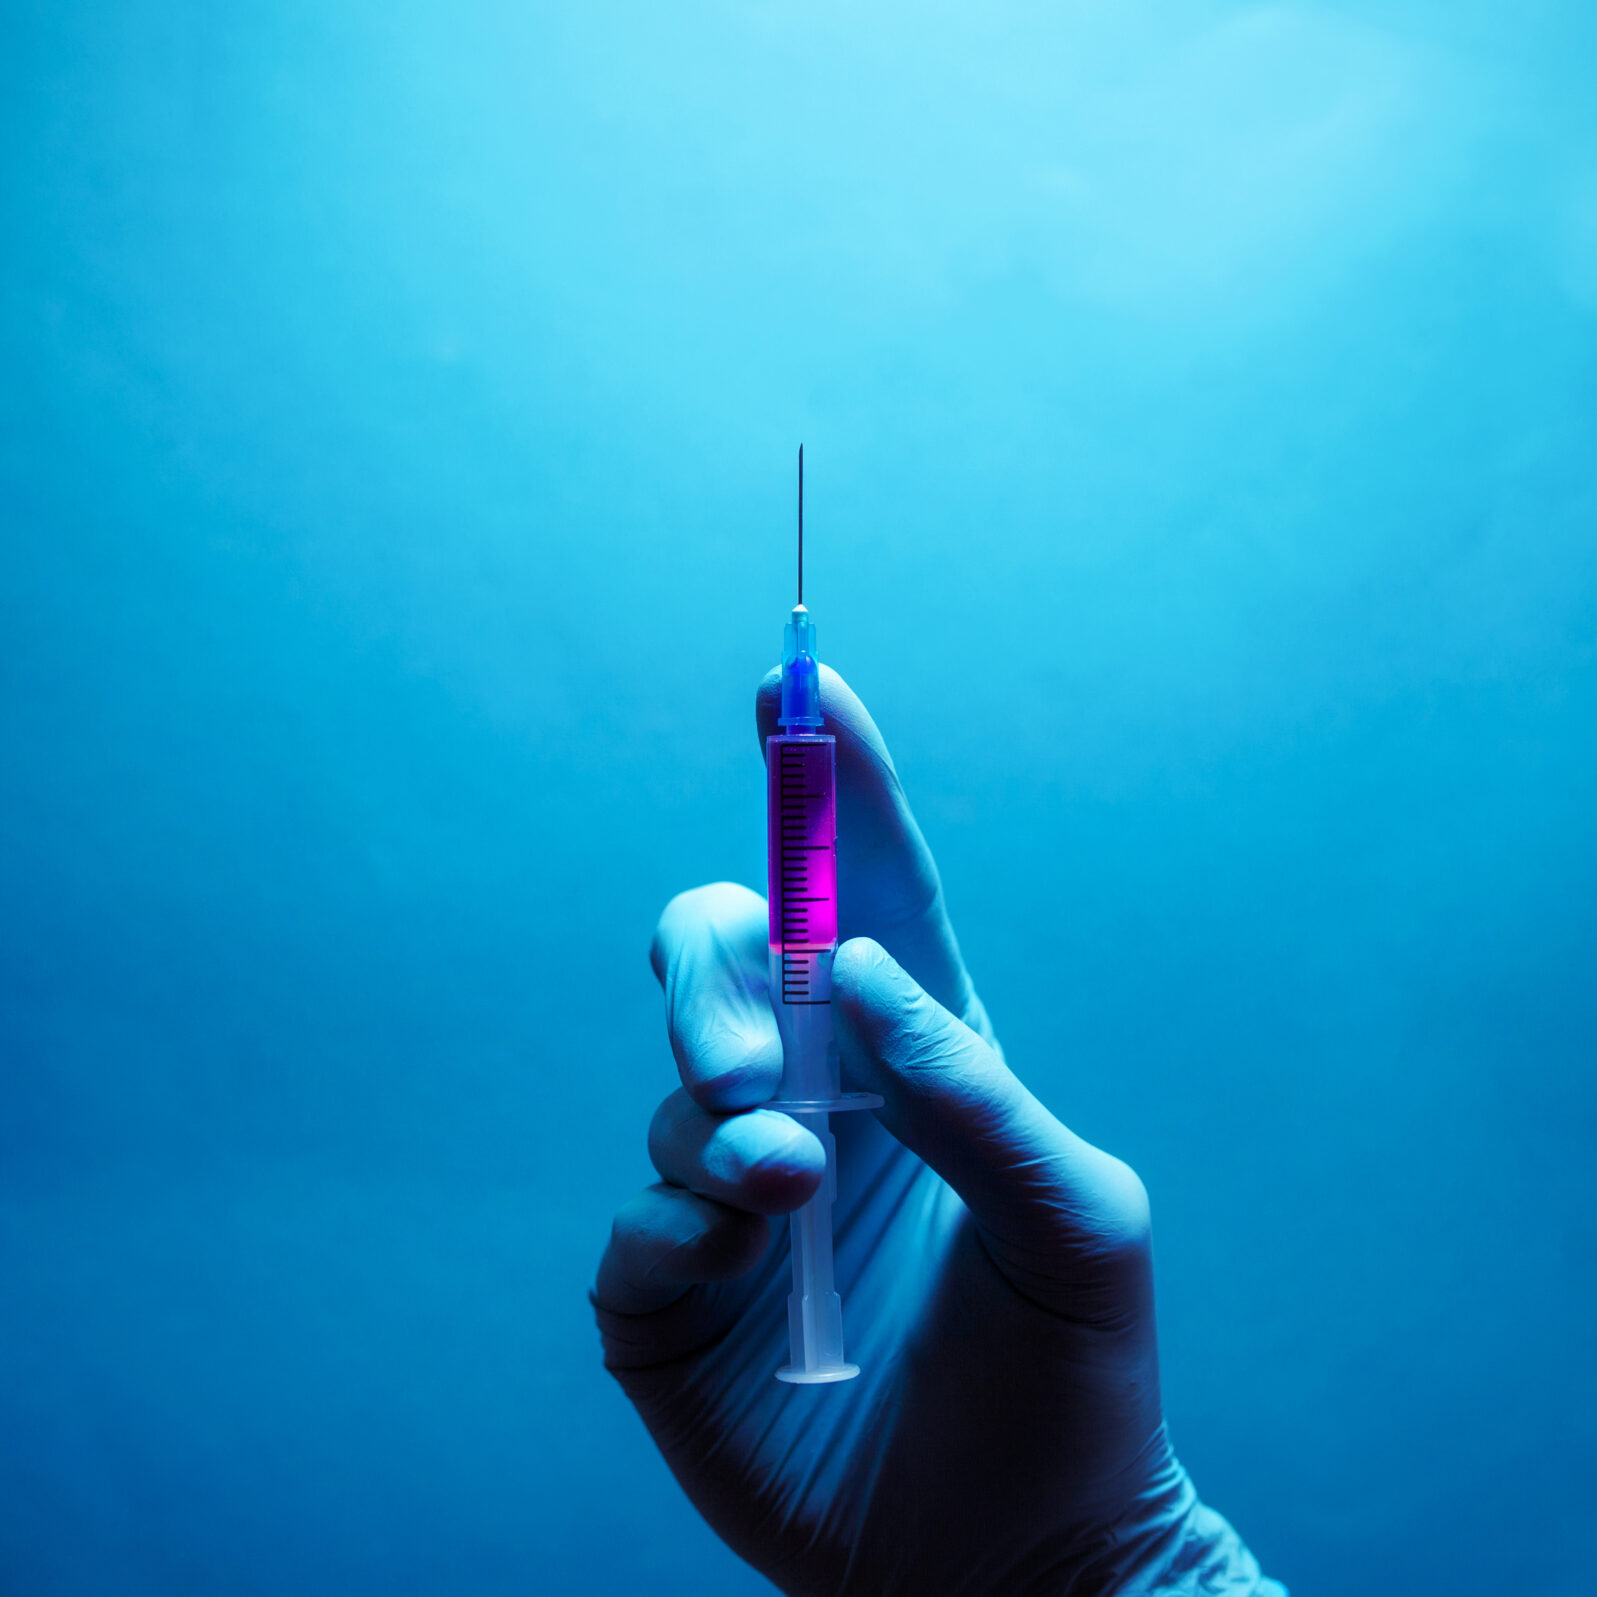 Beauty injection concept. Syringe with violet liquid for hypodermic injection.